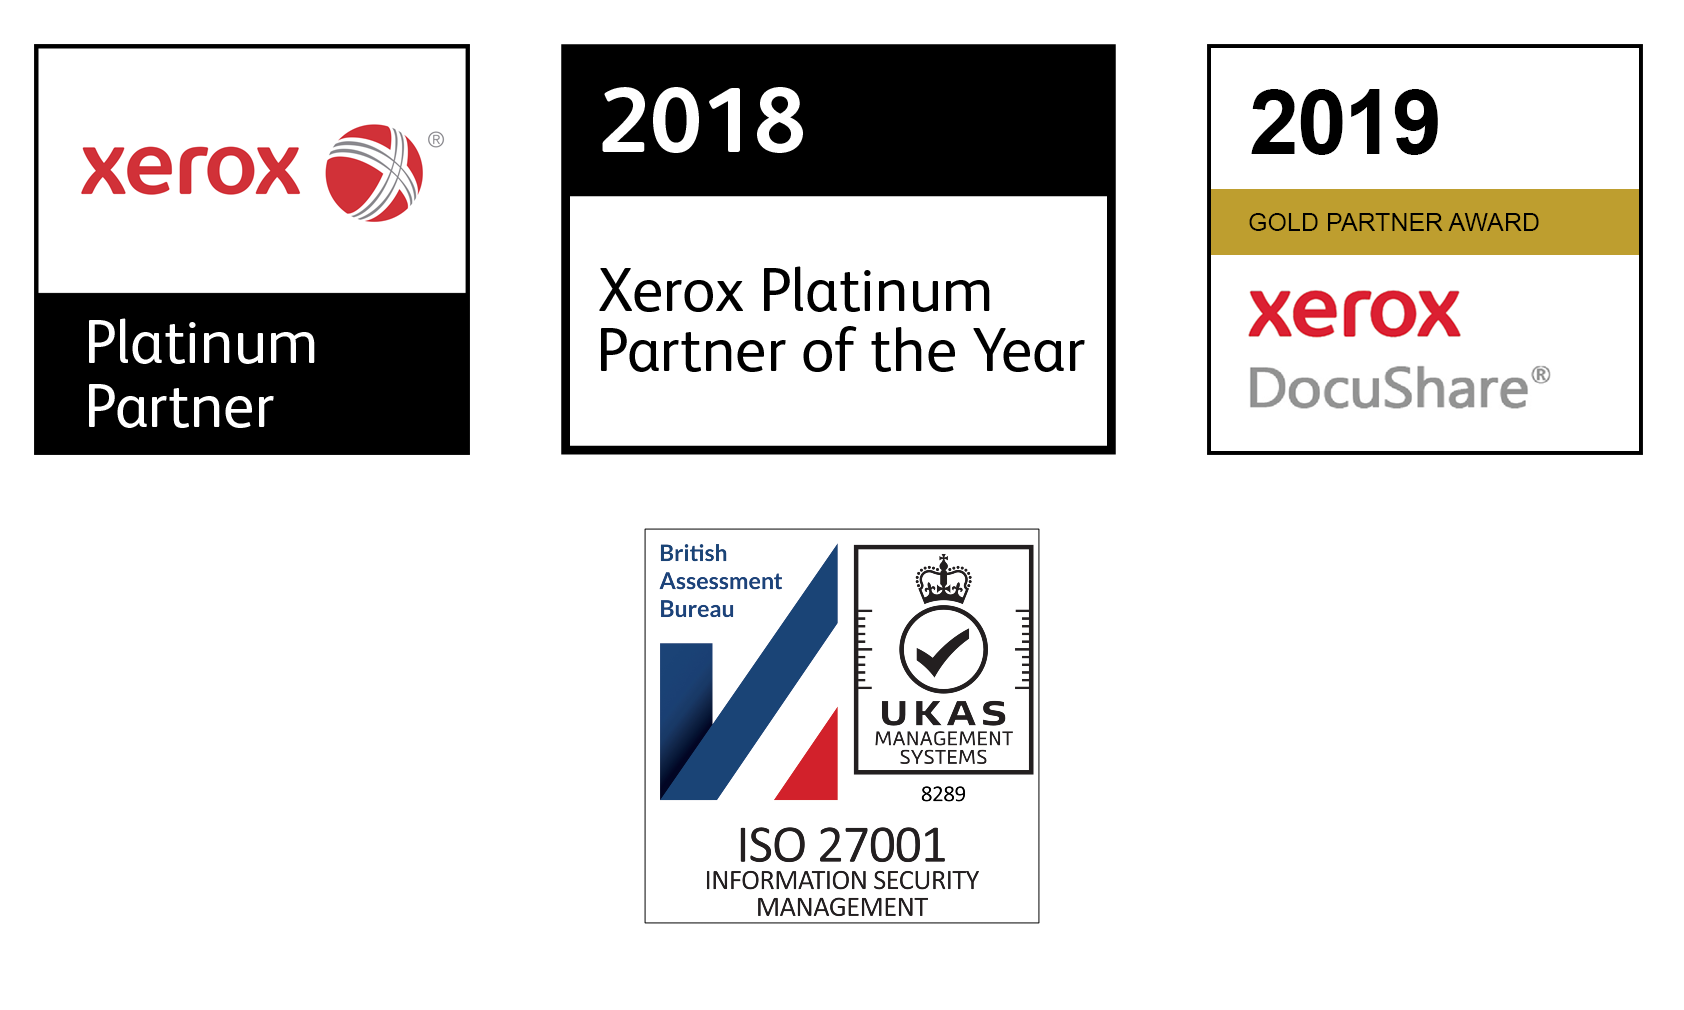 2019 Award Logos and ISO - Updated